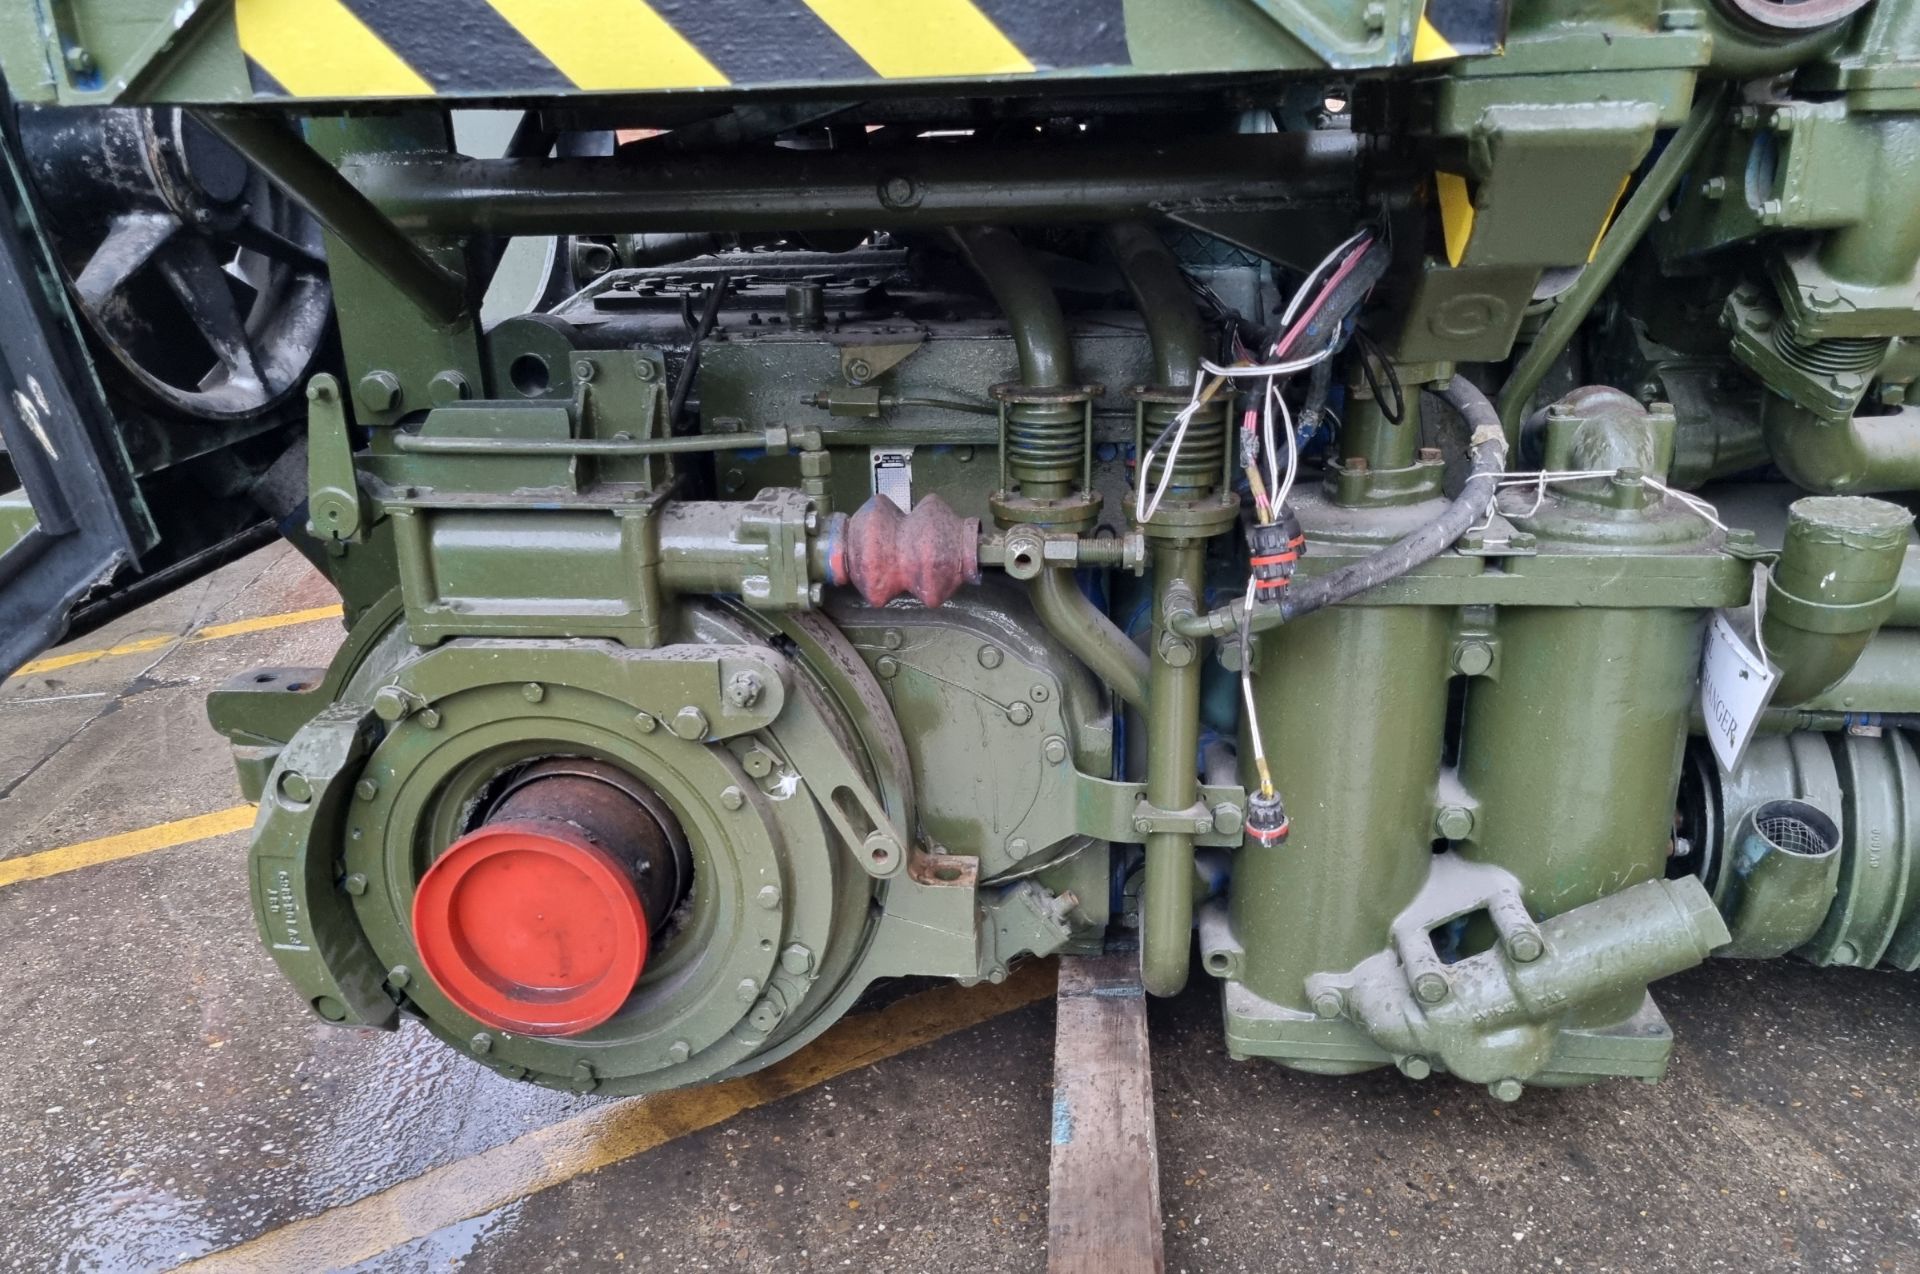 Challenger 2 tank engine Rolls Royce CV12 26 litre twin turbo diesel engine and transmission - Image 17 of 21